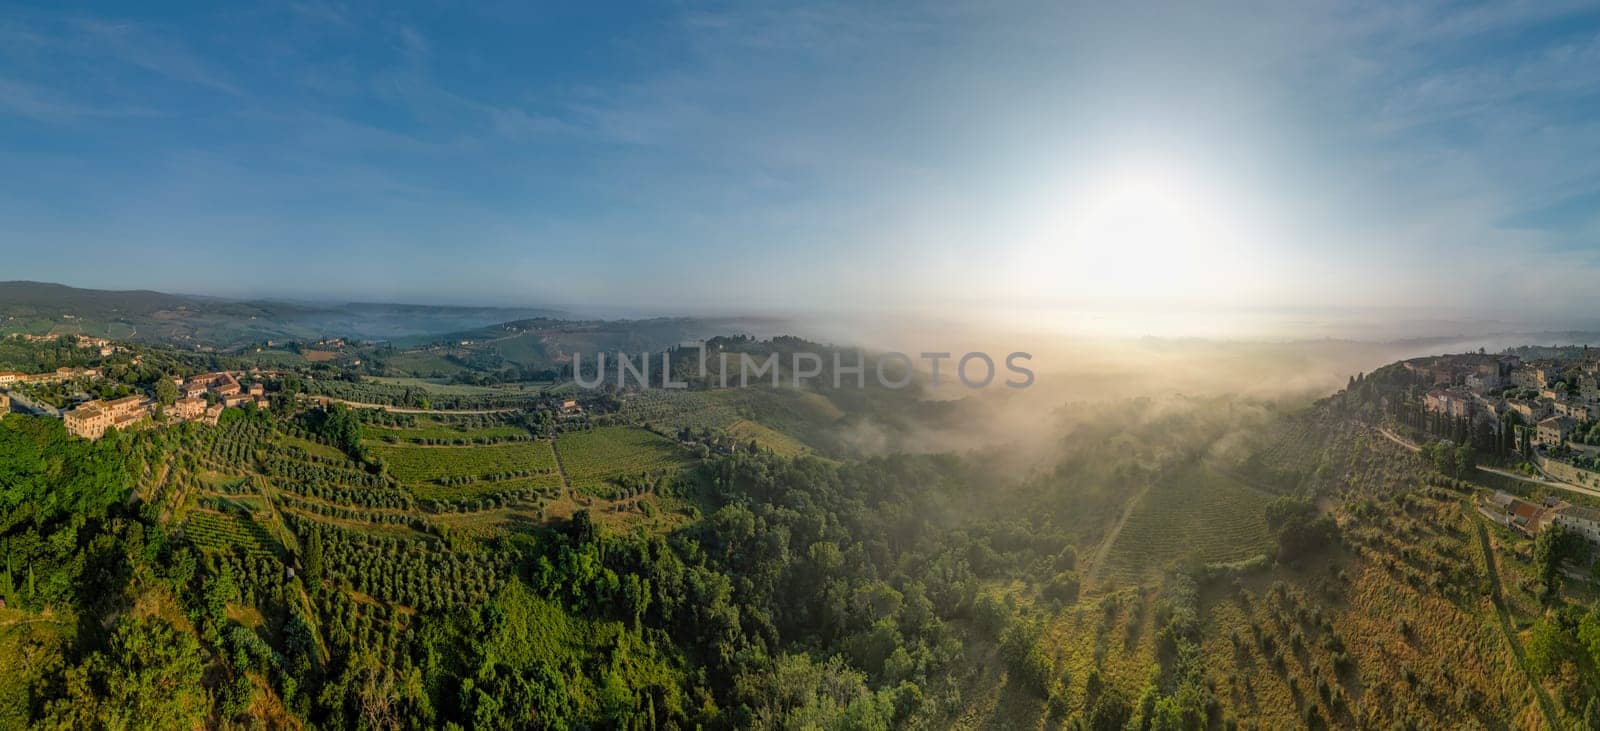 Tuscany landscape with cypress trees and blue sky with clouds